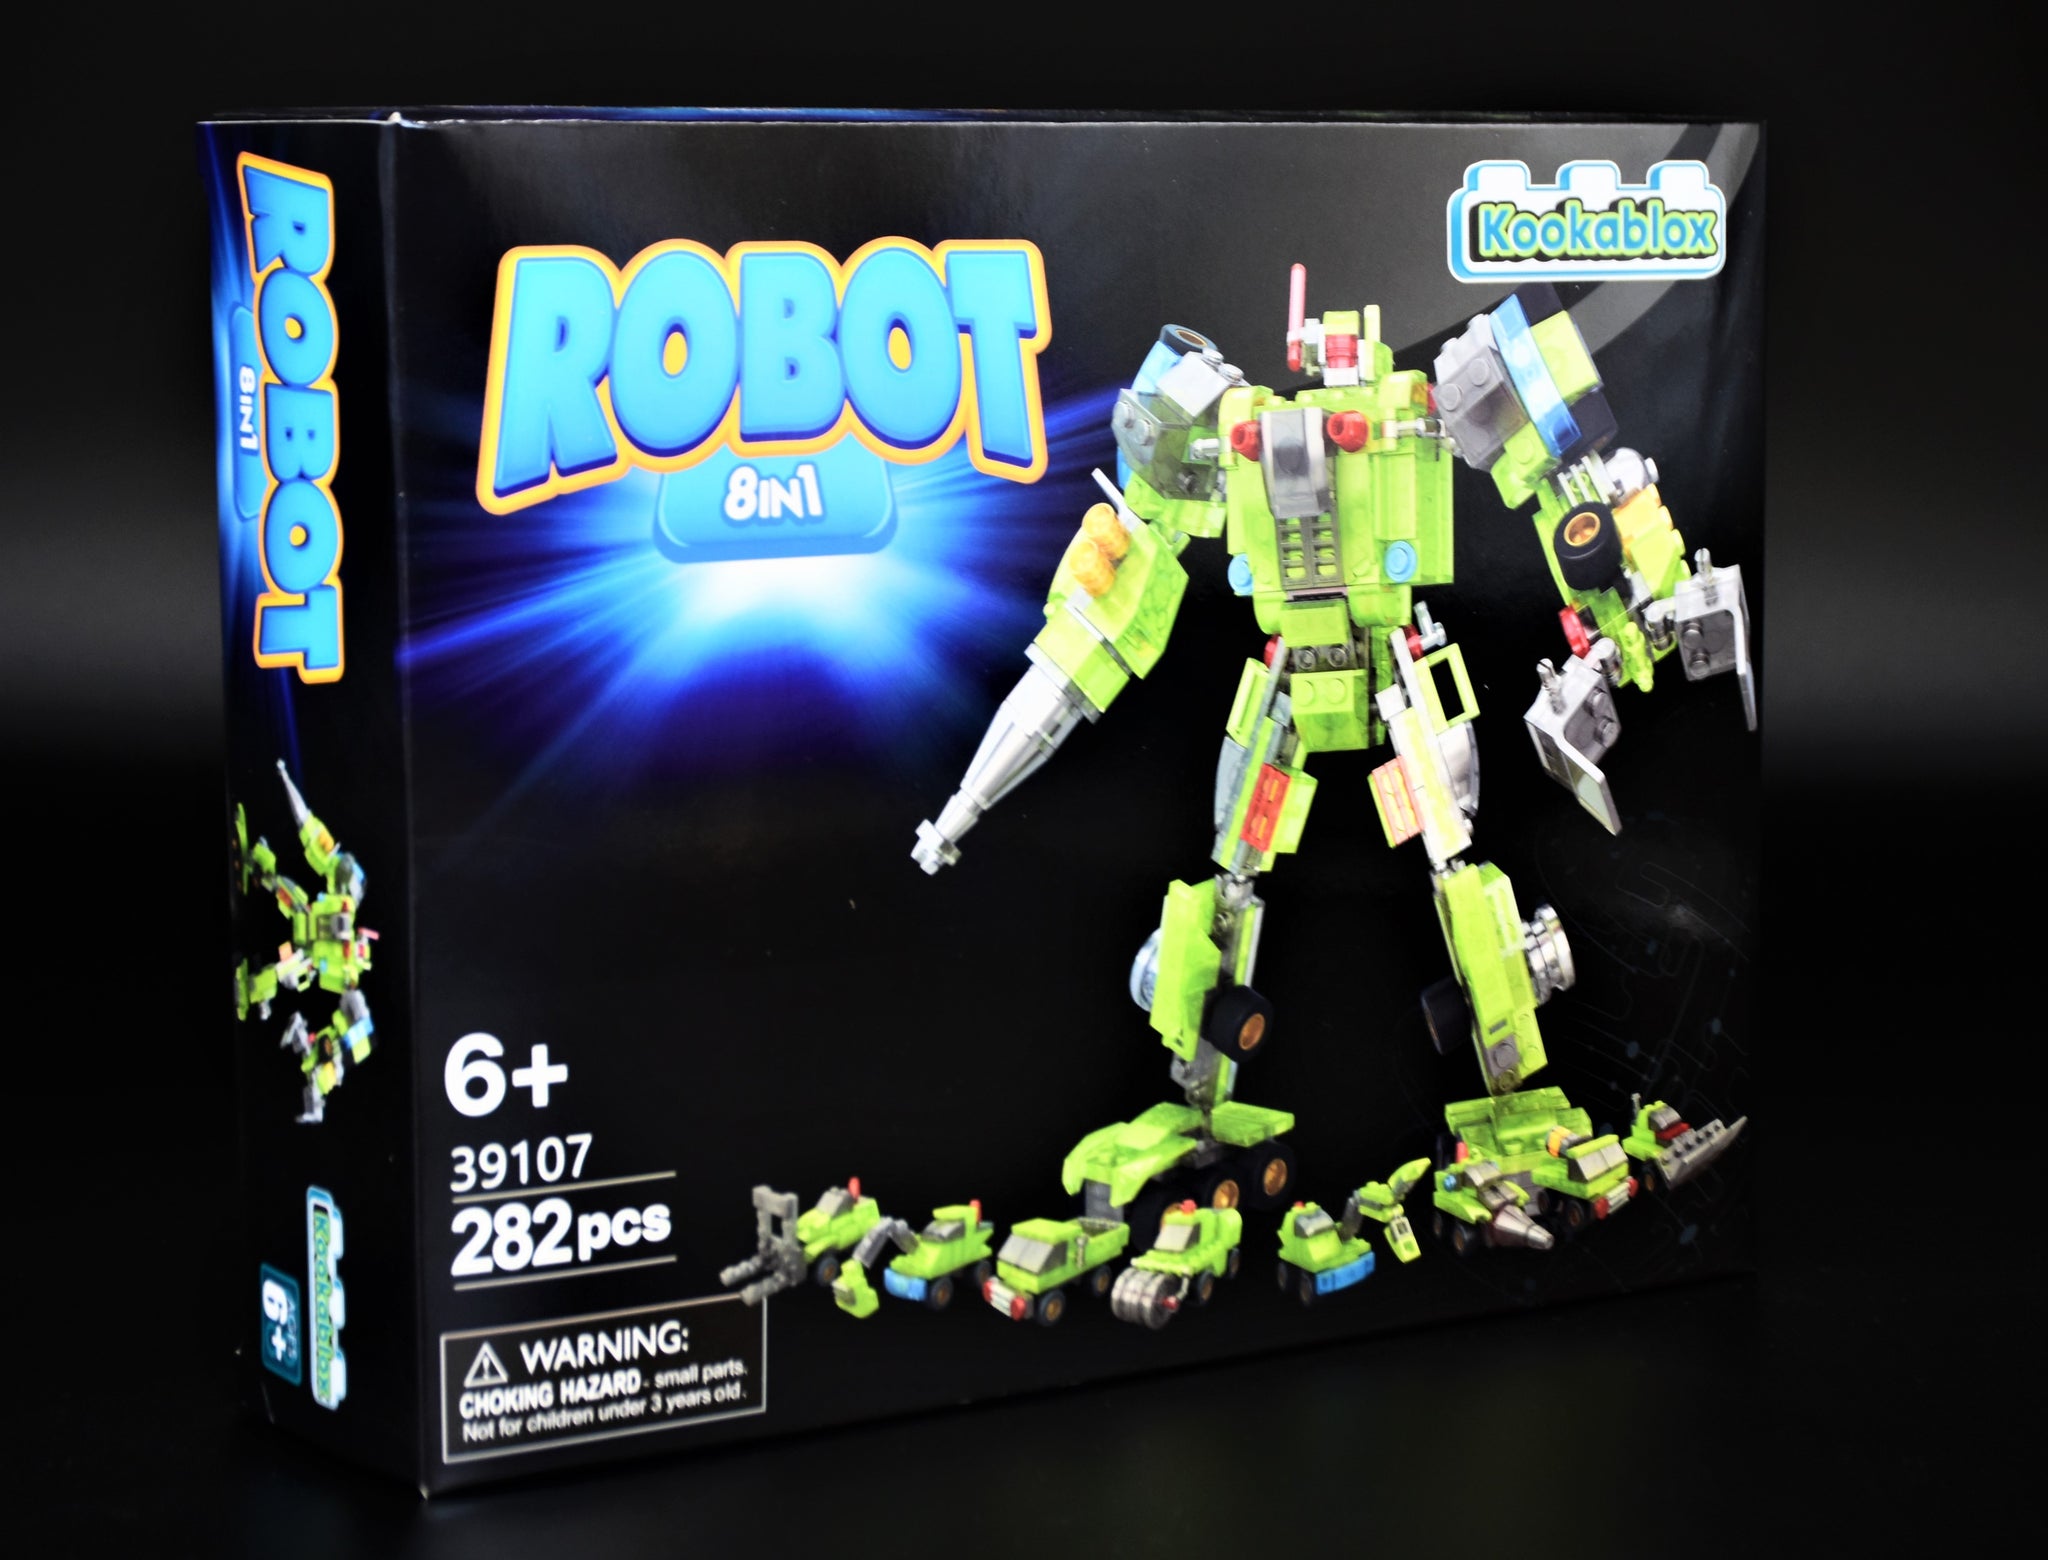 8-in-1 Robot Building Block Kit. 8 Mini Toys Transform Into 1 Large Robot Toy (318 Pieces)